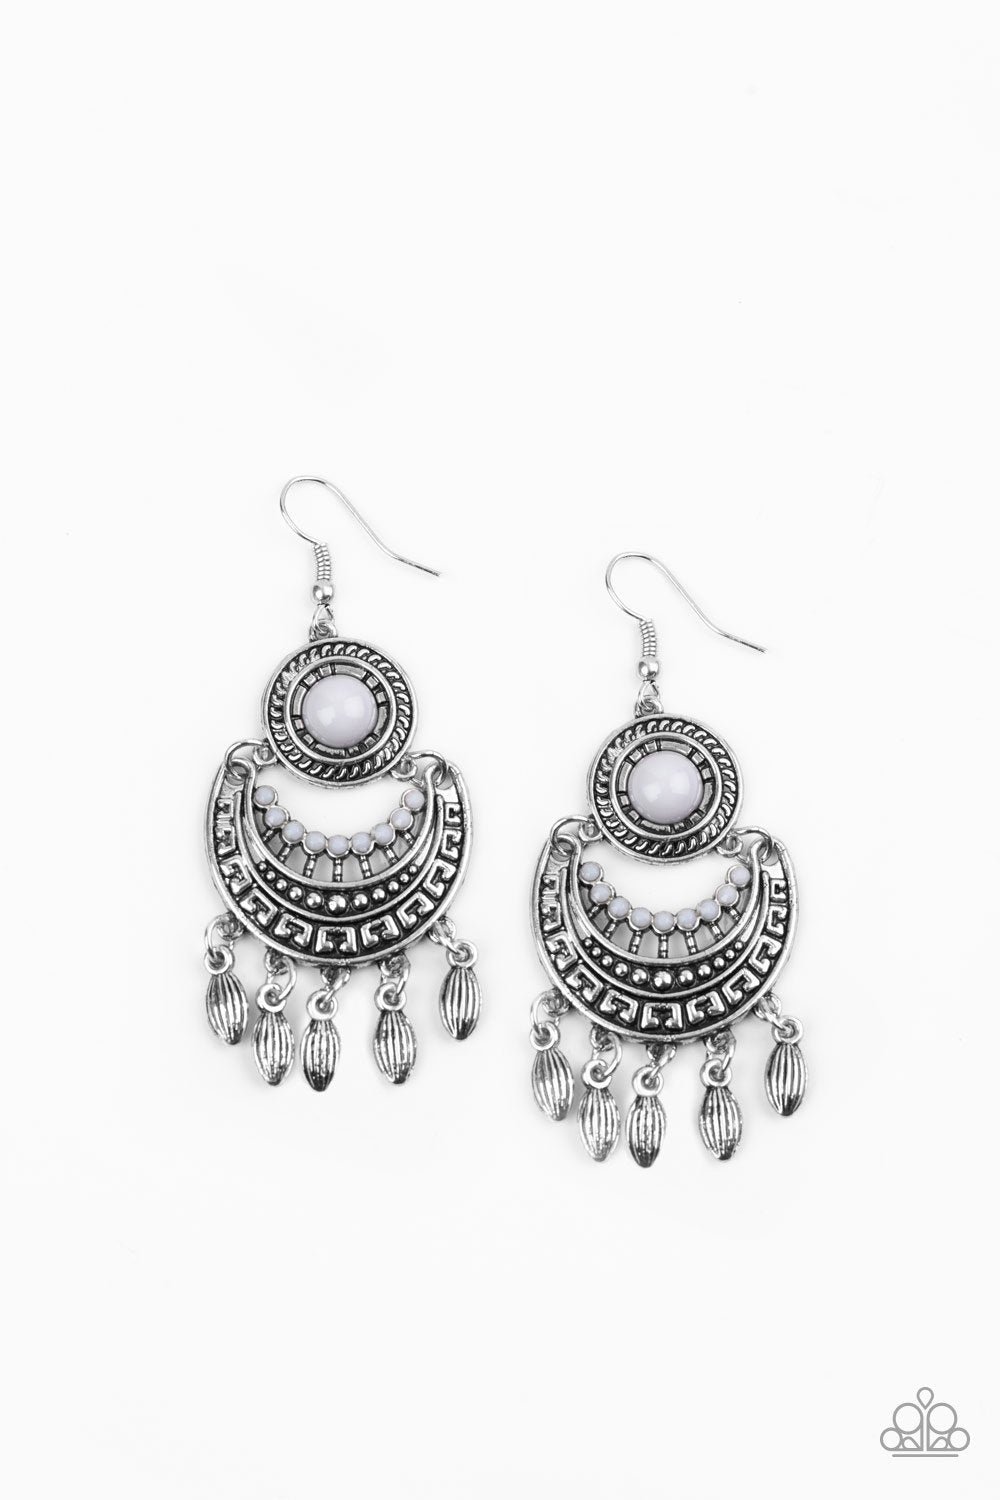 Mantra to Mantra Silver Earrings - Paparazzi Accessories - lightbox -CarasShop.com - $5 Jewelry by Cara Jewels